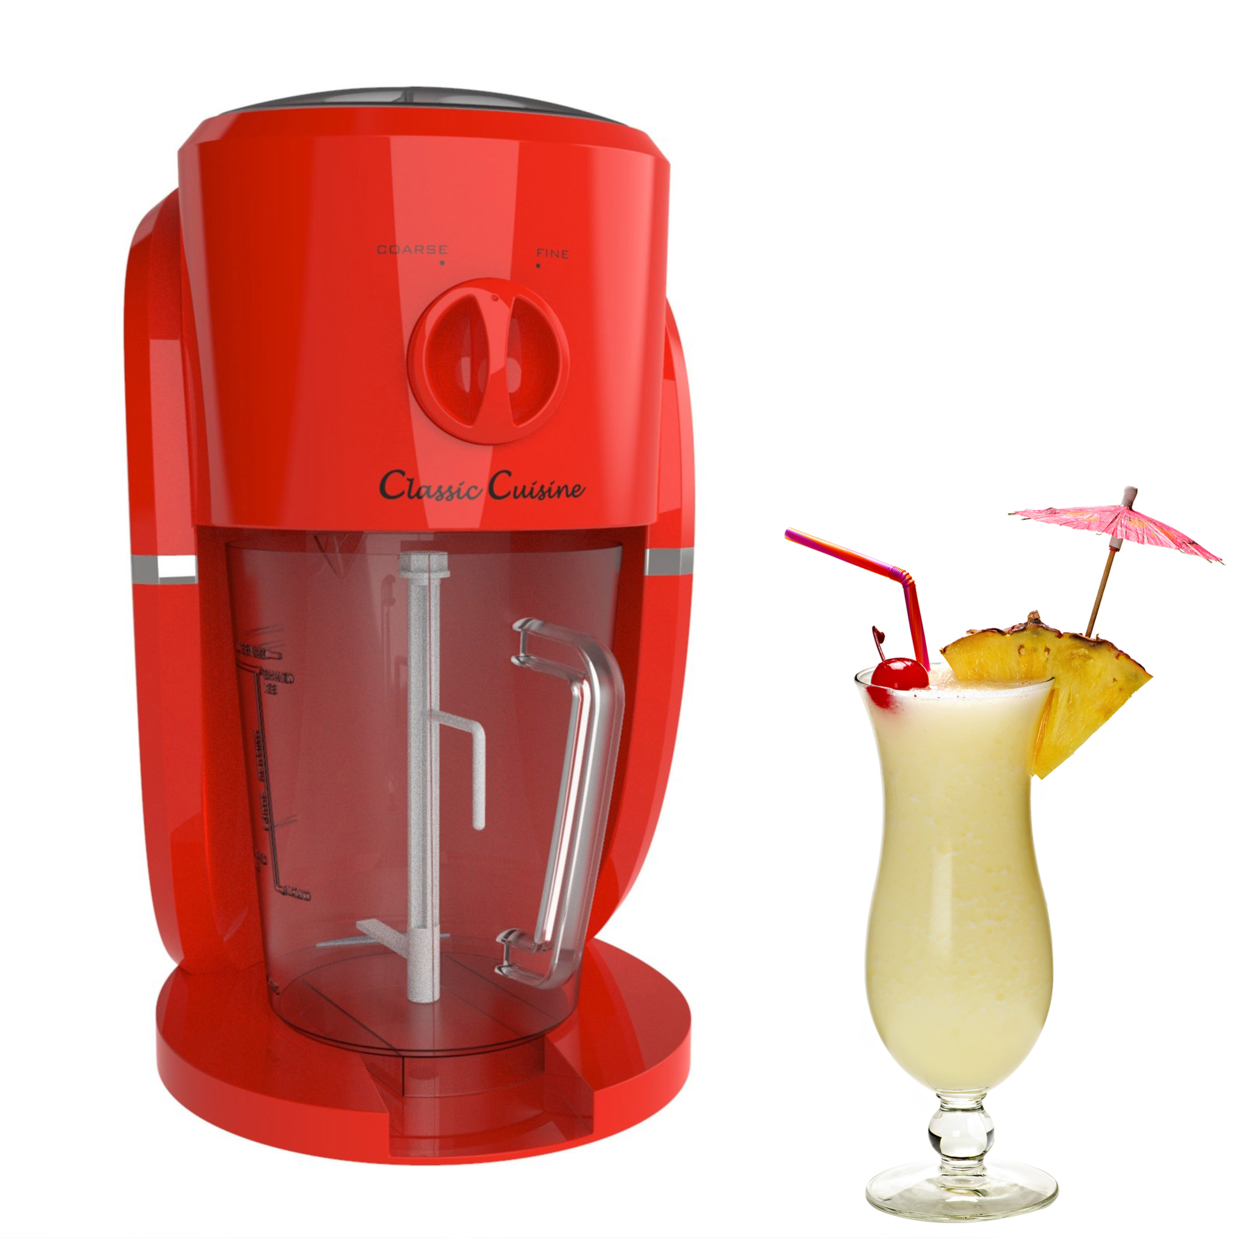 Frozen Drink Maker, Mixer And Ice Crusher Machine For Margaritas, Pina Coladas, Daiquiris, Shaved Ice Treats Pitcher Included